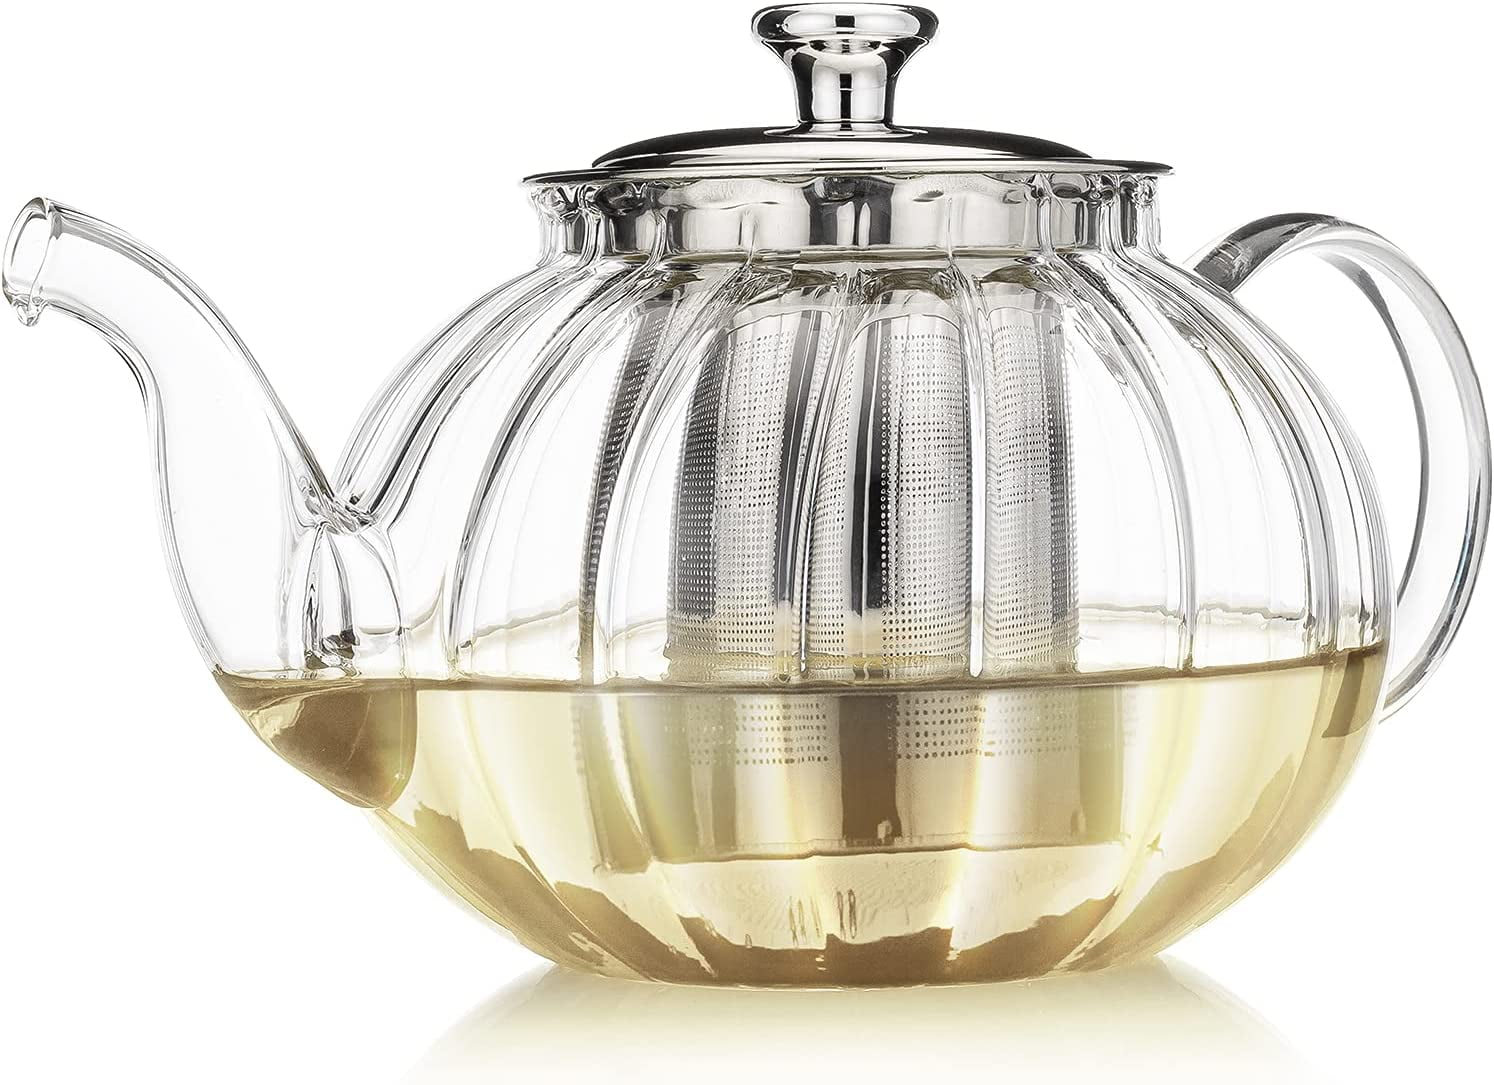 Teabloom Stovetop & Microwave Safe Glass Teapot (40 oz / 1.2 L) with Removable Loose Tea Glass Infuser 鈥?Includes 2 Blooming Tea